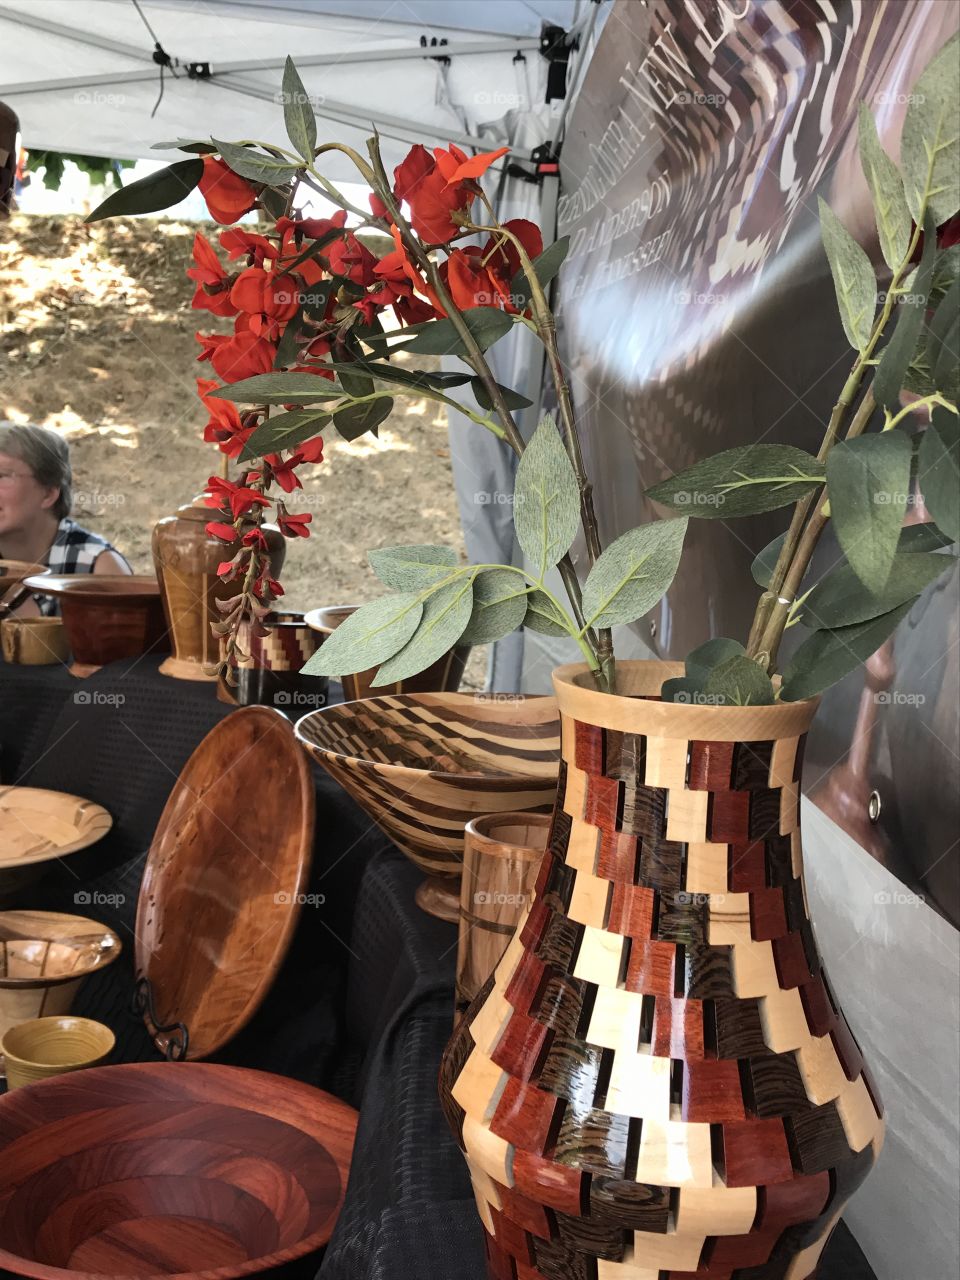 Various handmade wooden plates, bowls, and vases, with red flowers